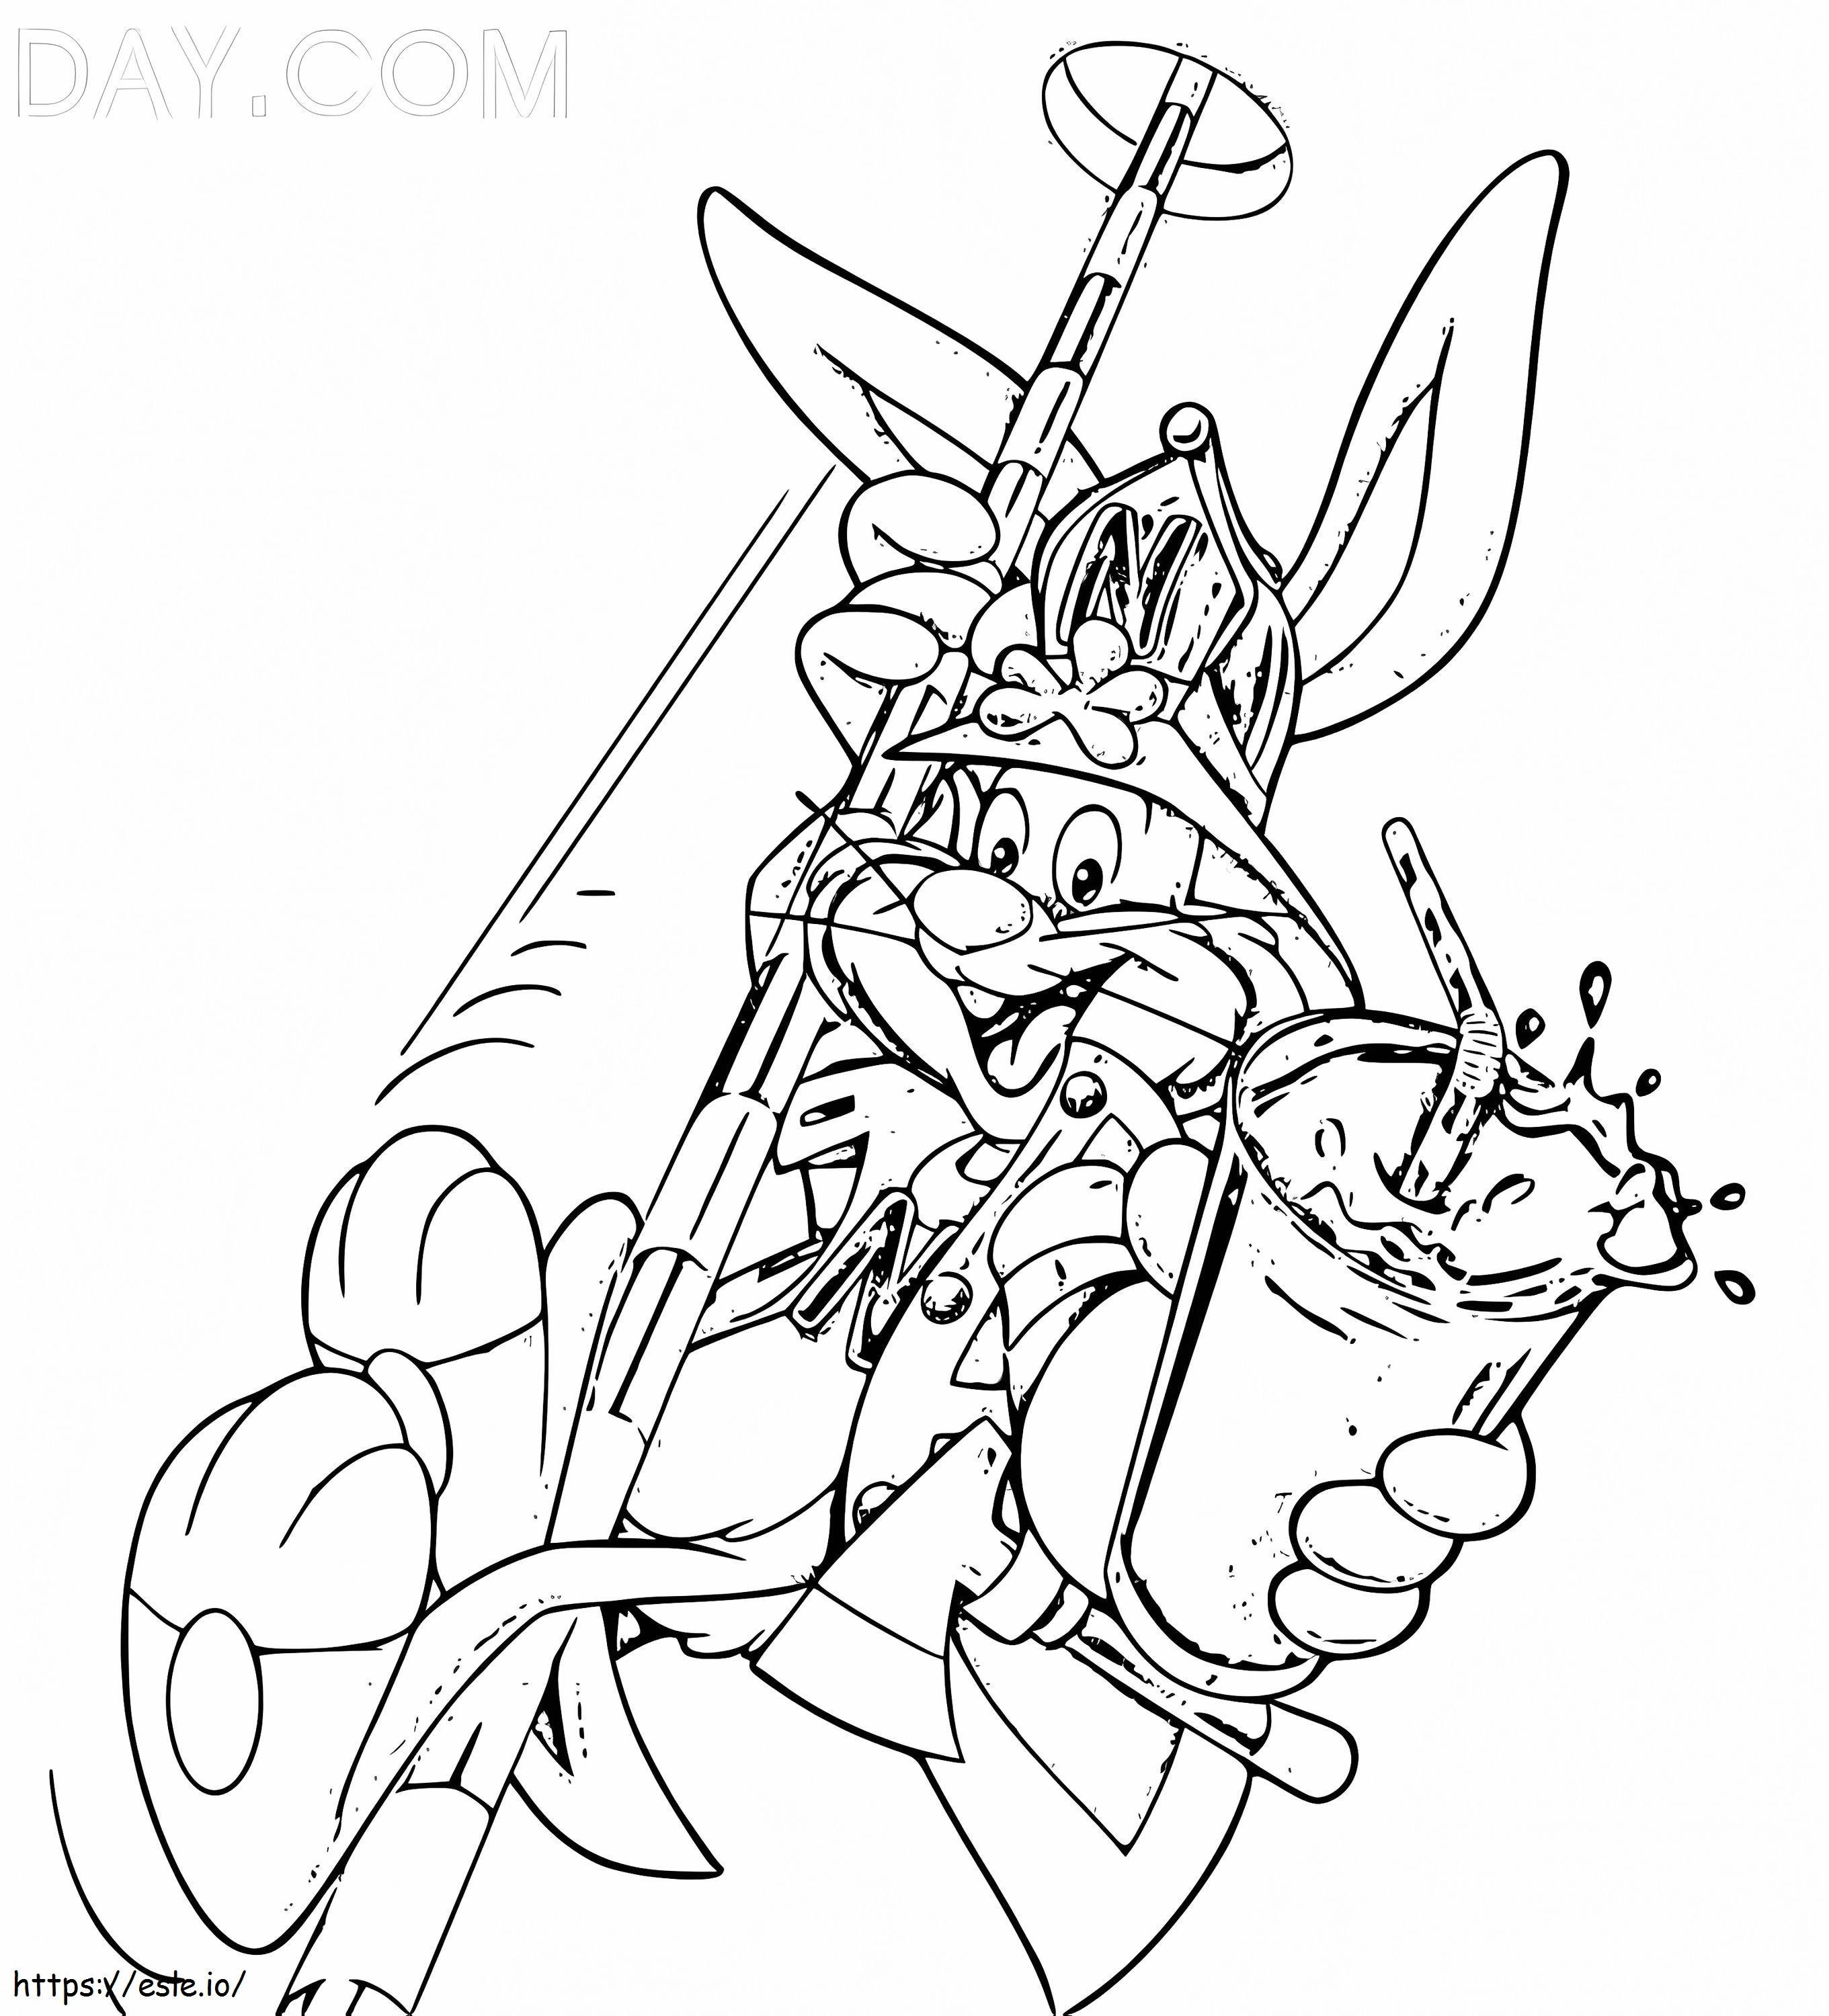 Free Nesquik coloring page